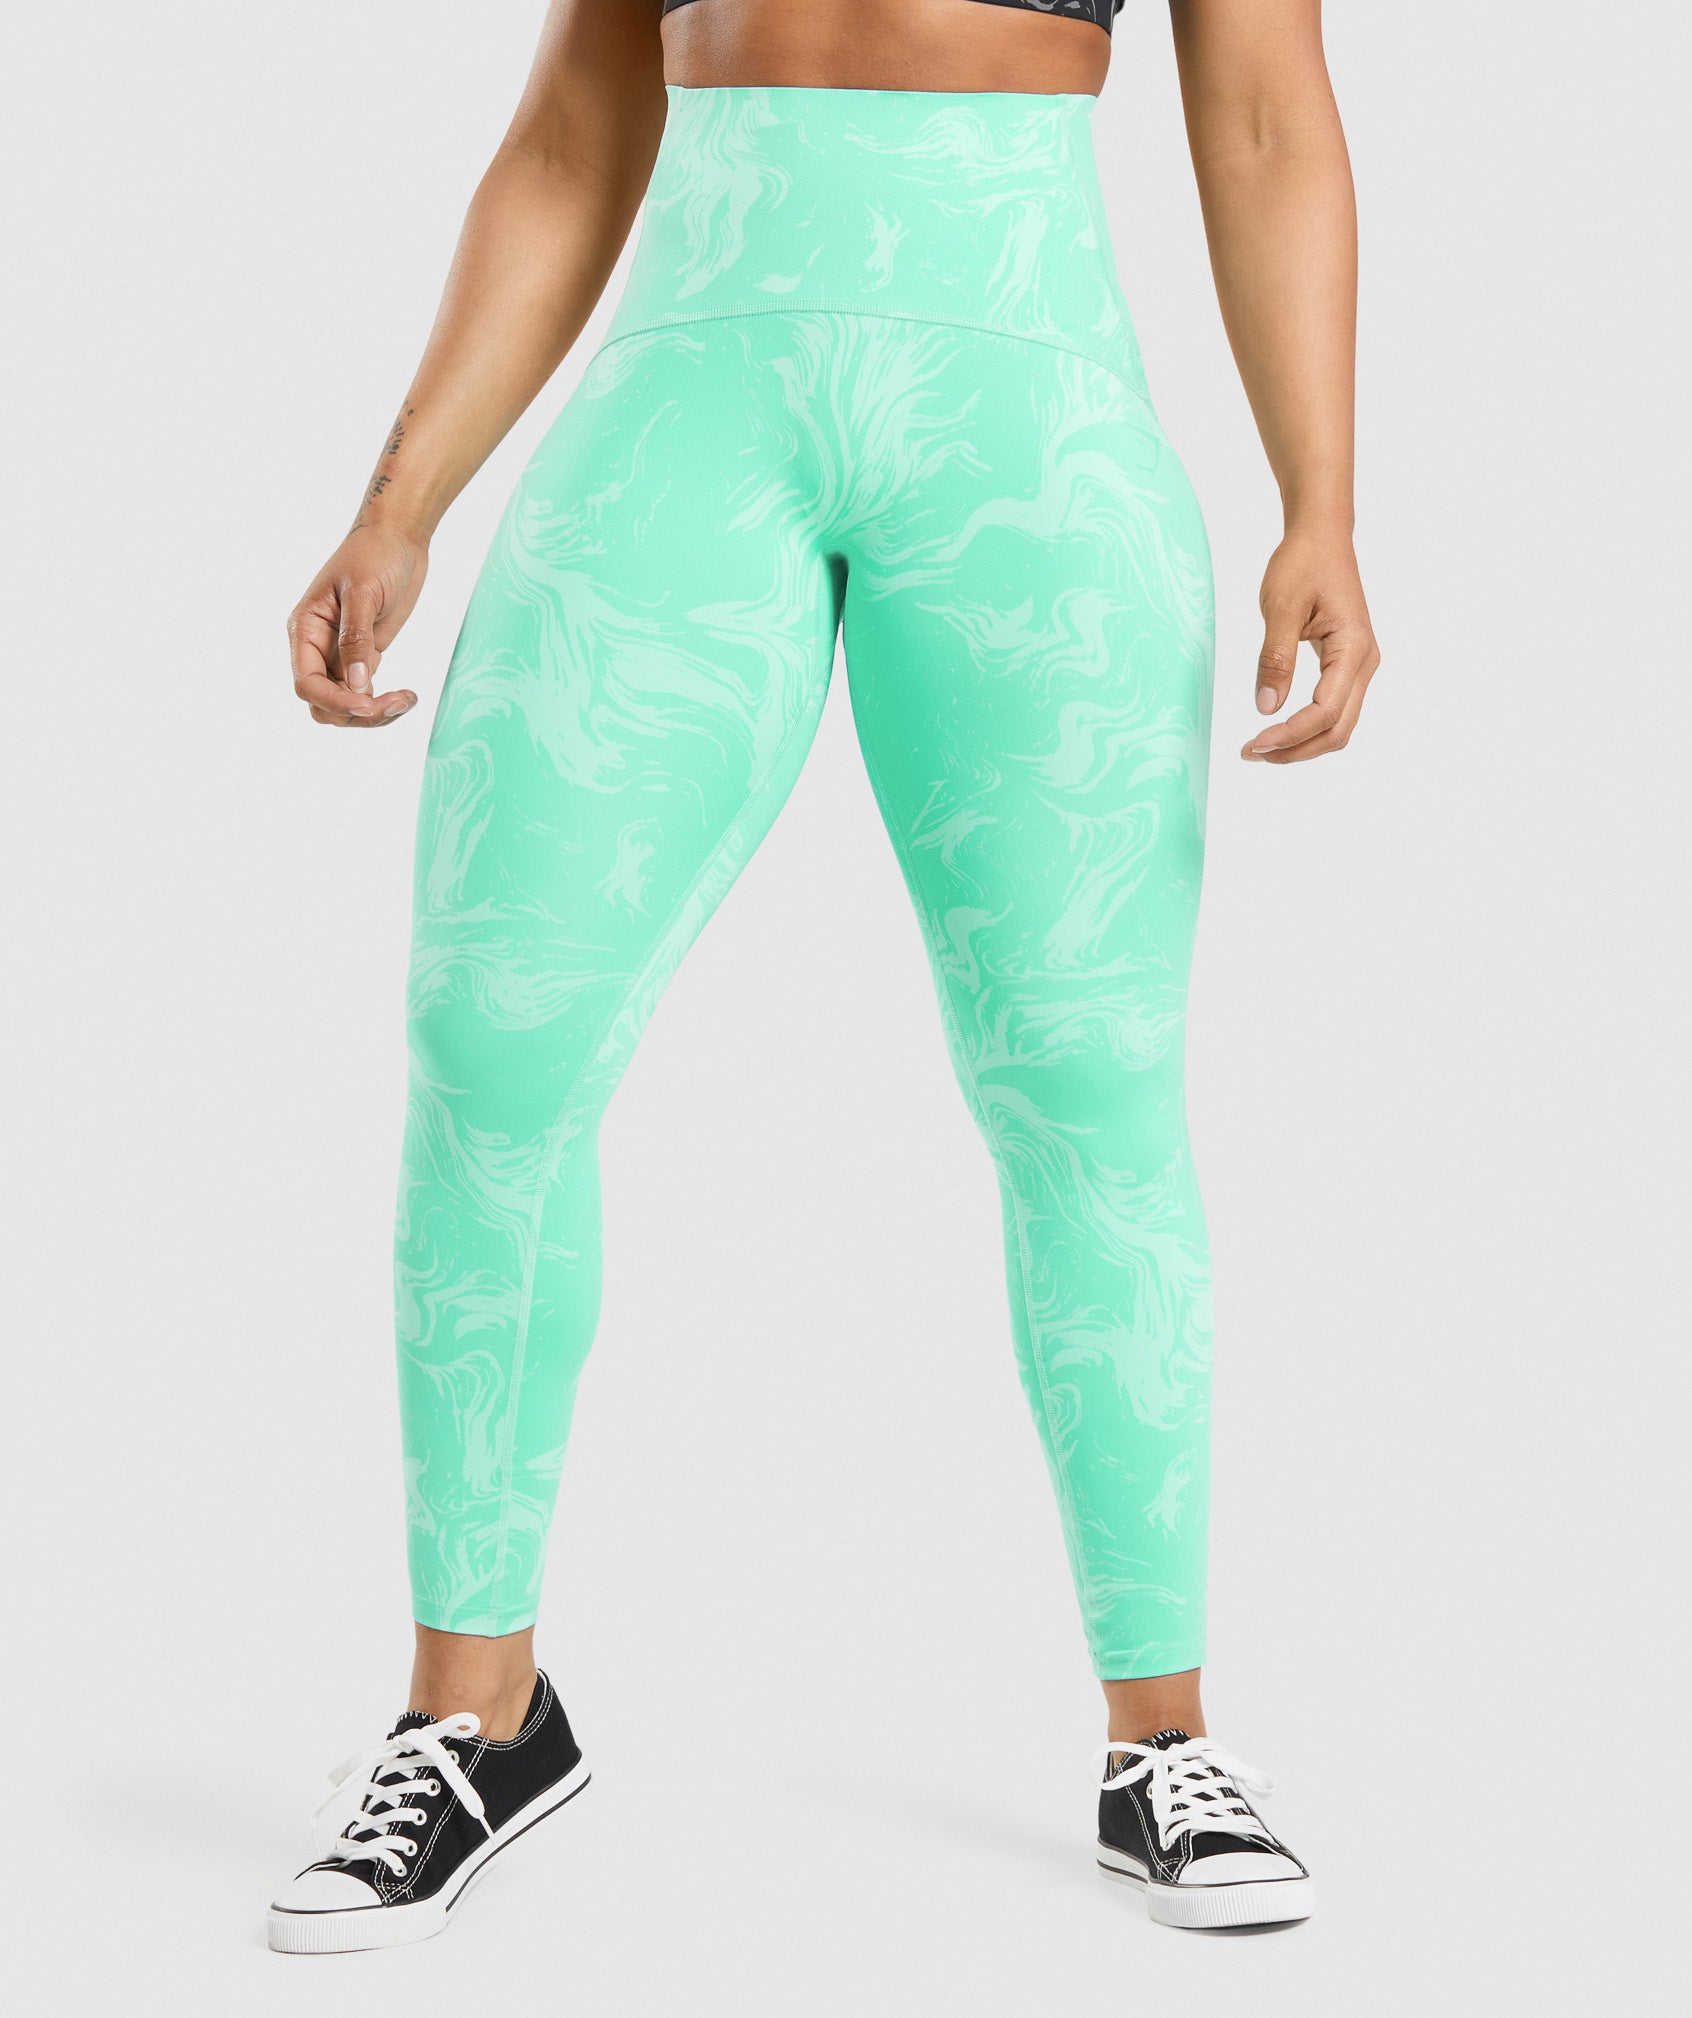 Waist Support Leggings in Bright Turquoise Print - view 1